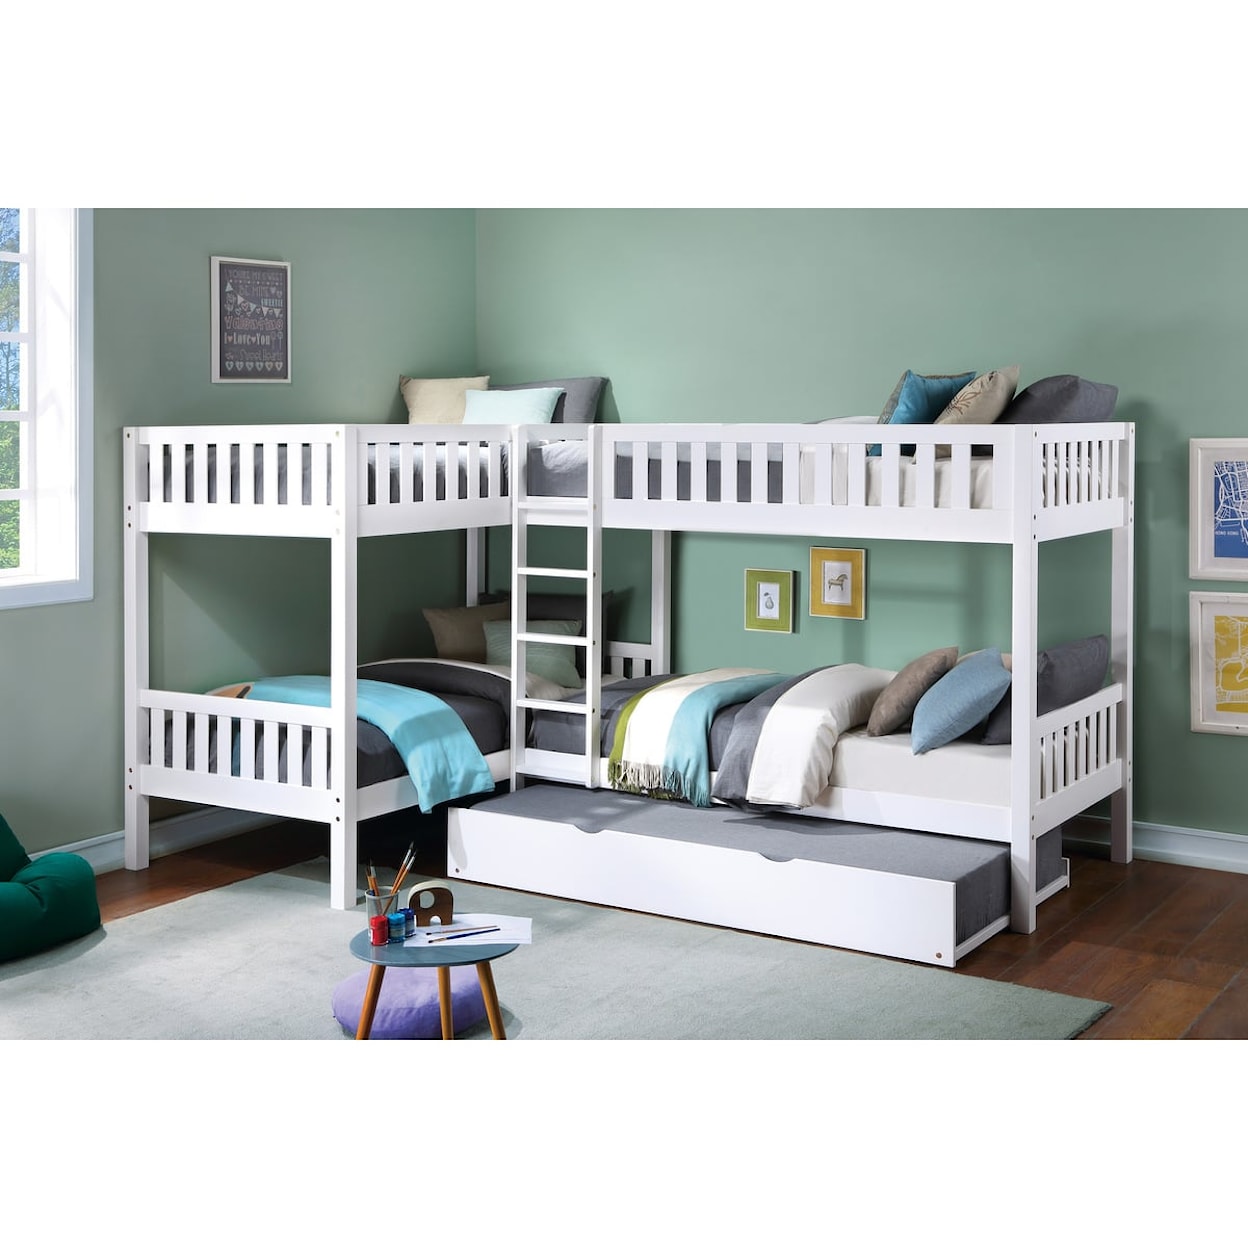 Homelegance Galen Corner Bunk Bed with Twin Trundle